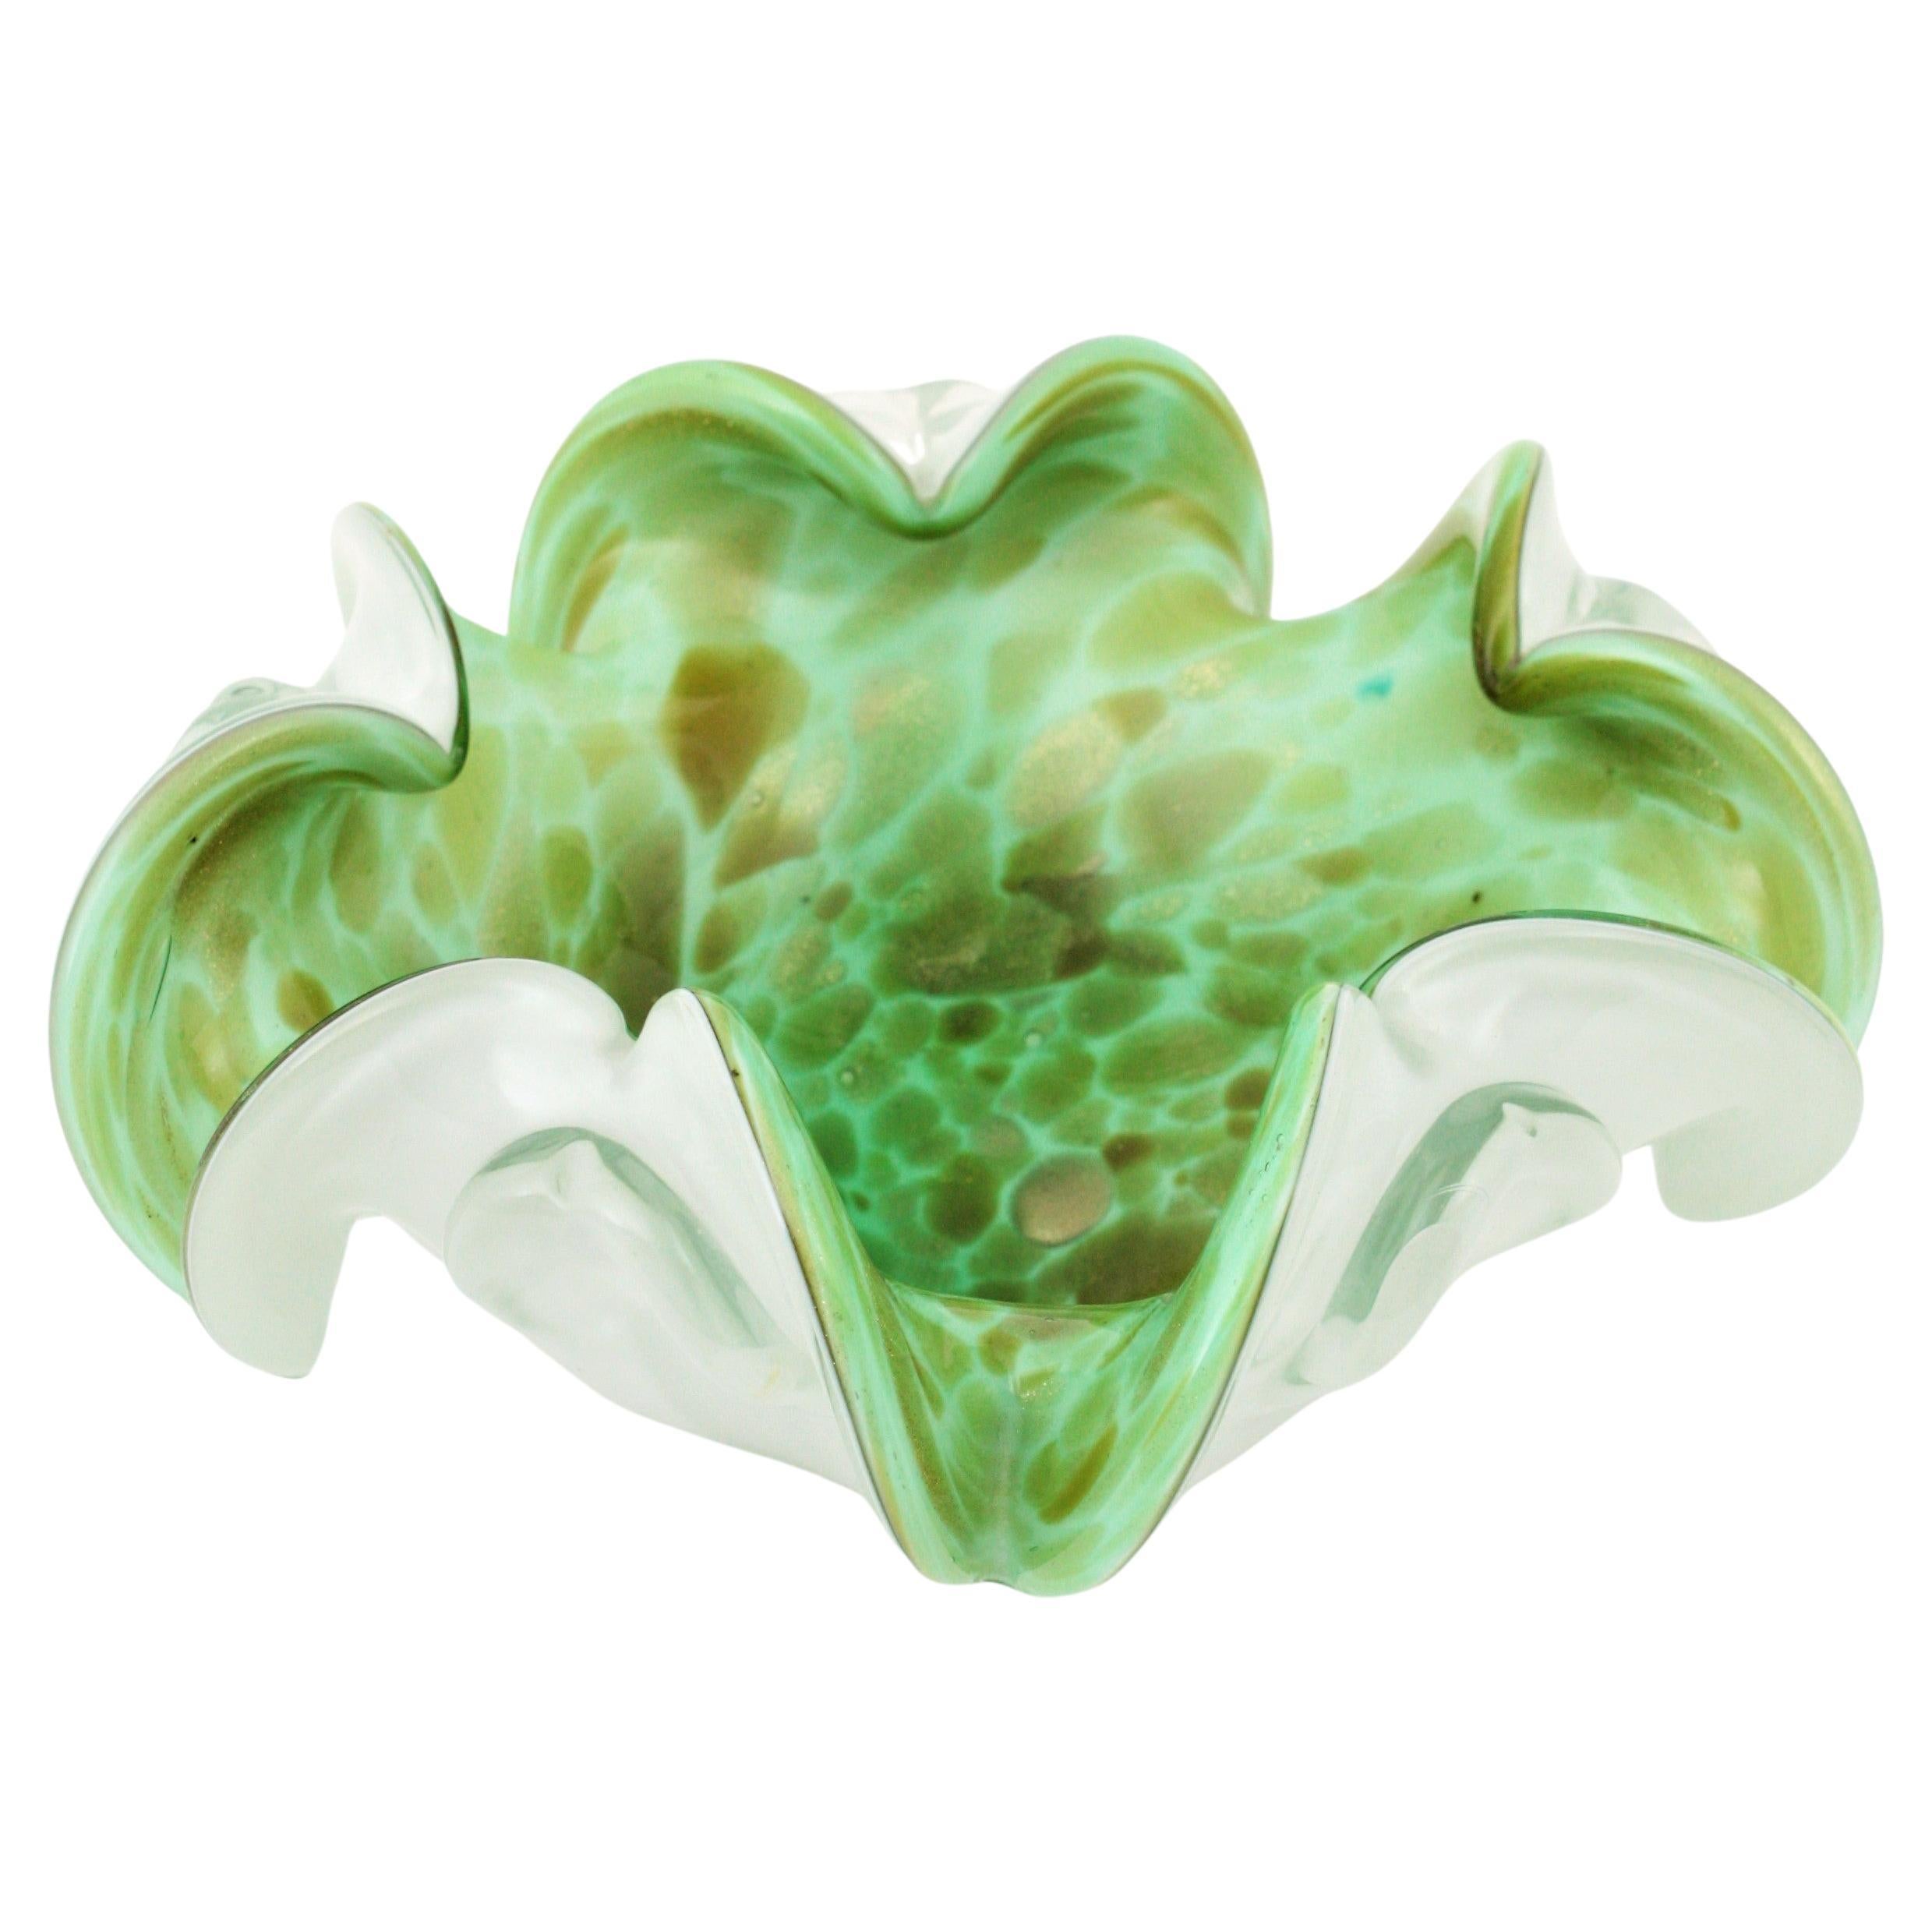 Spectacular Murano art glass flower bowl with copper or gold aventurine flecks. Attributed to Fratelli Toso, circa 1950s.
Flower shaped hand blown glass bowl or ashtray in mint green and pastel green and white glass cased into clear glass.
Highly